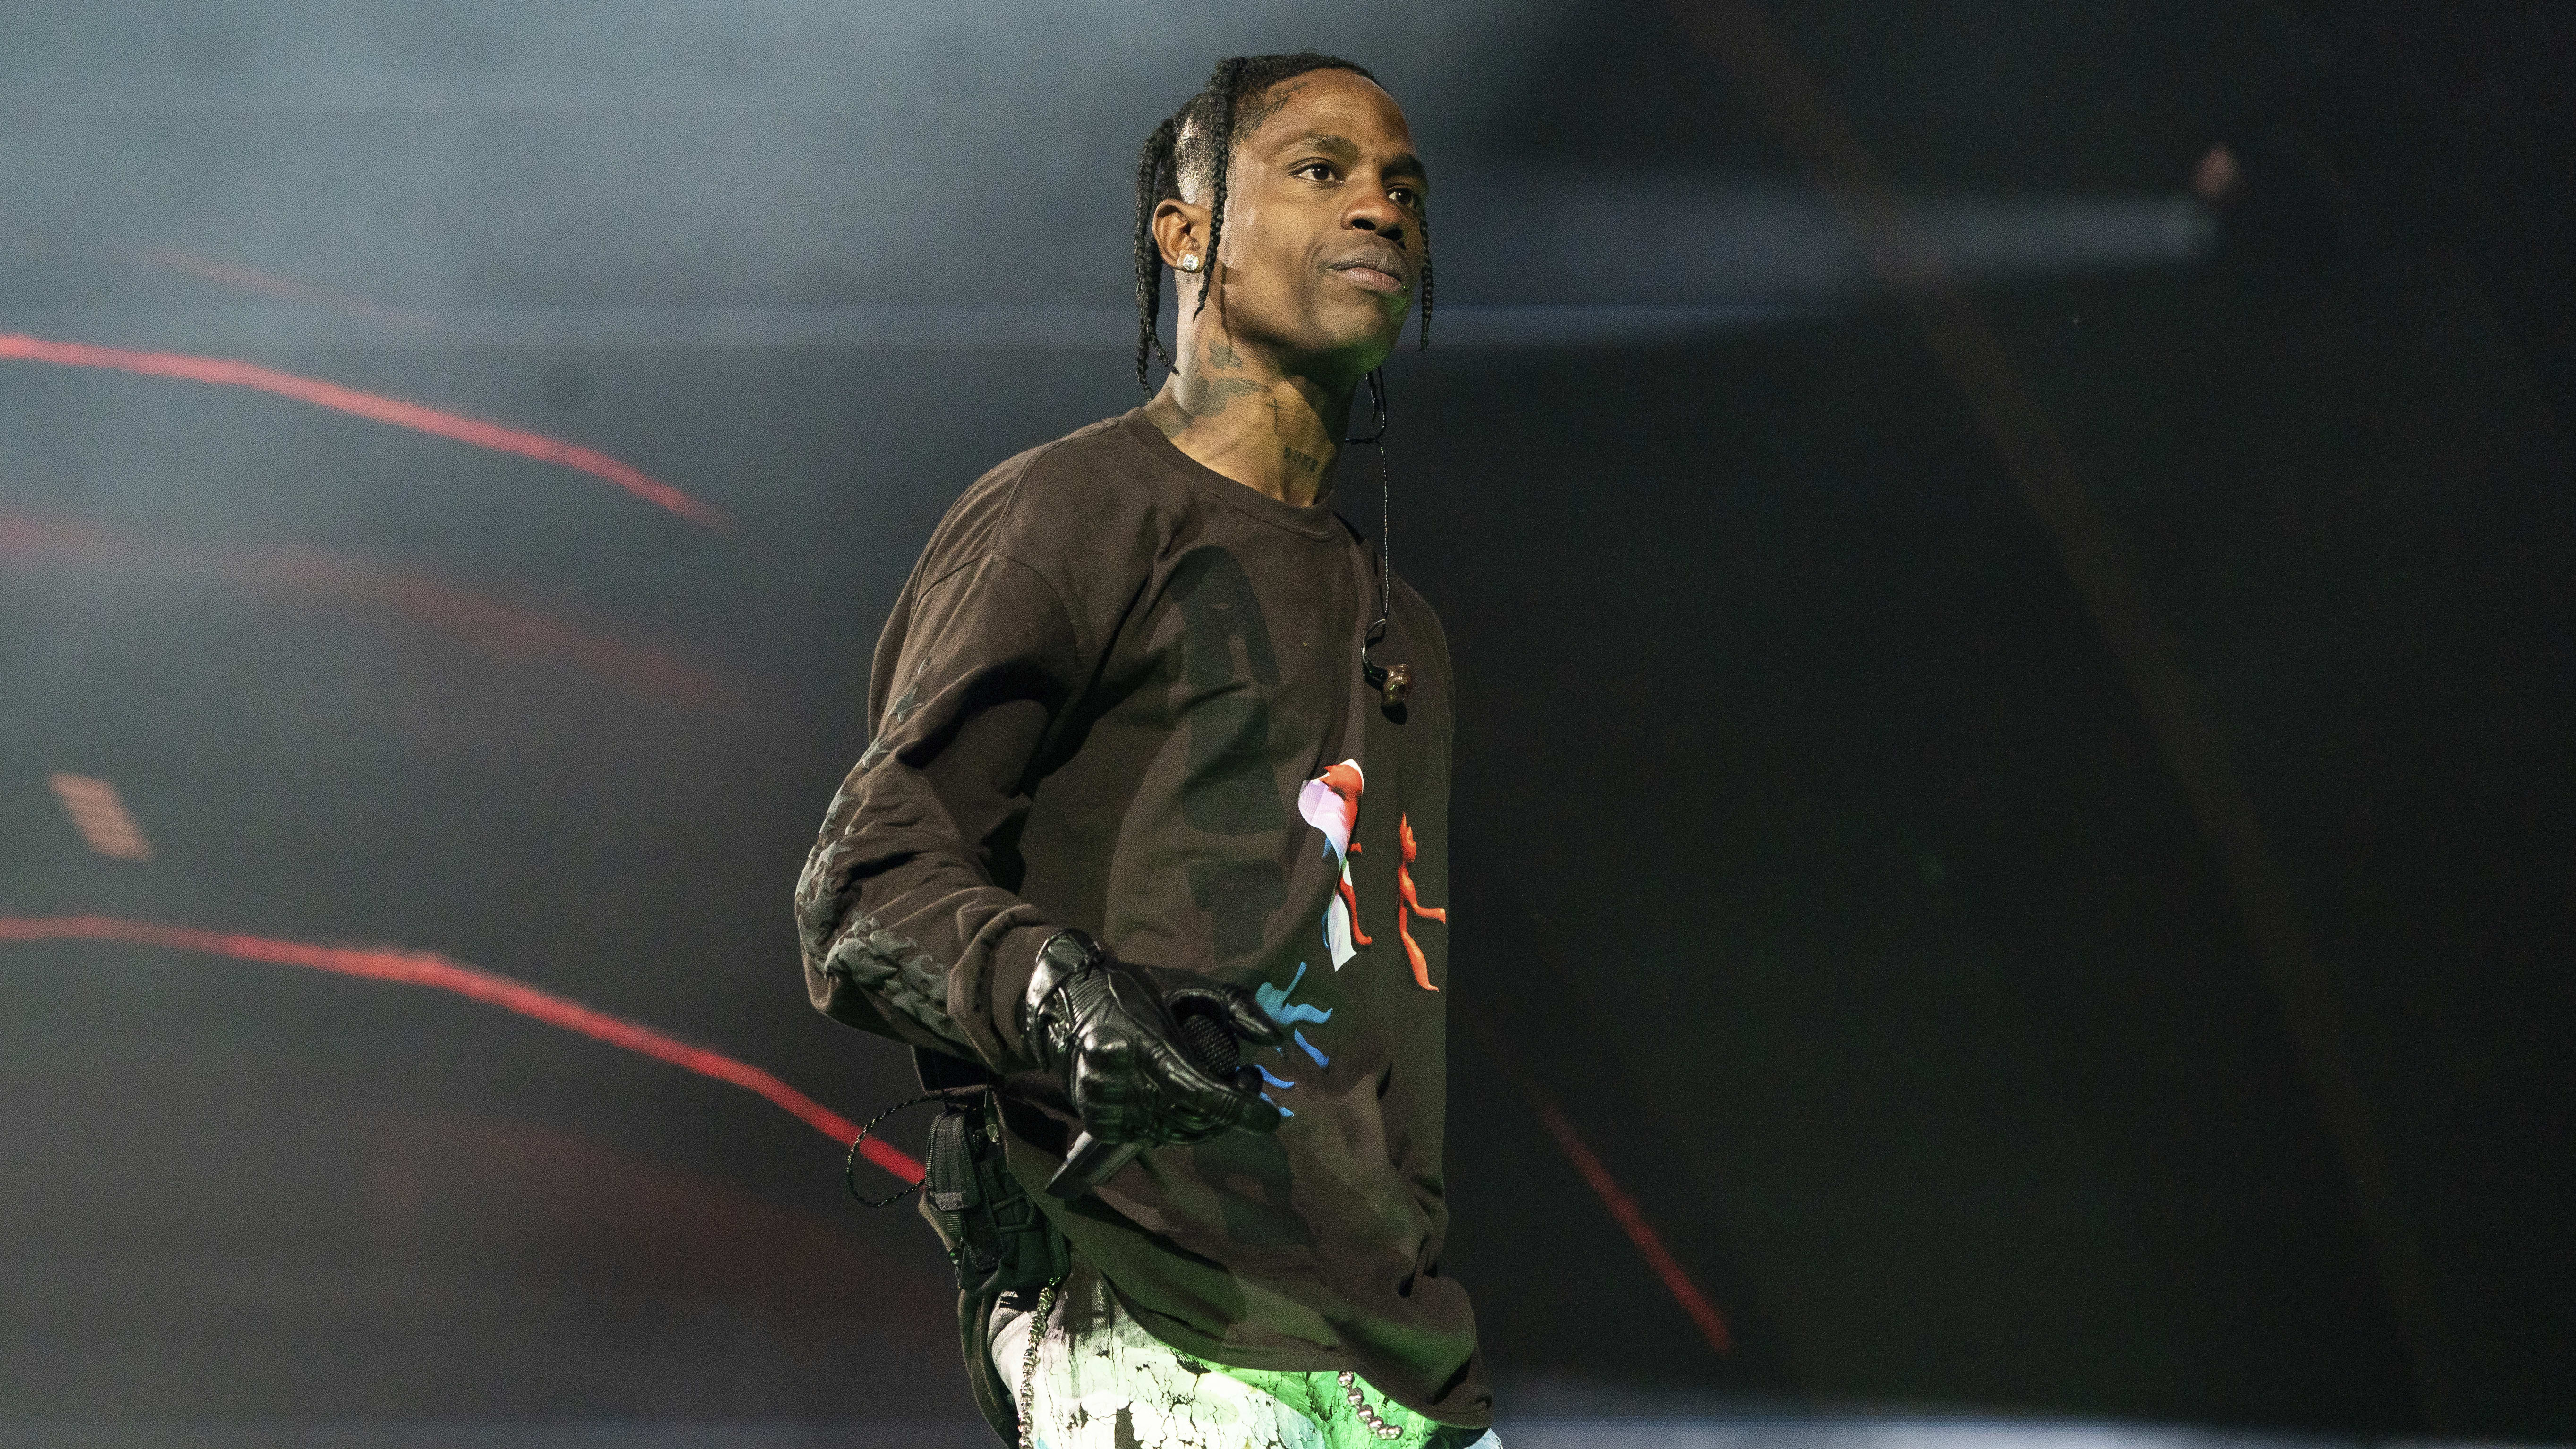 Travis Scott says he's 'devastated' by deaths at festival, supports probe  into 'tragic loss of life